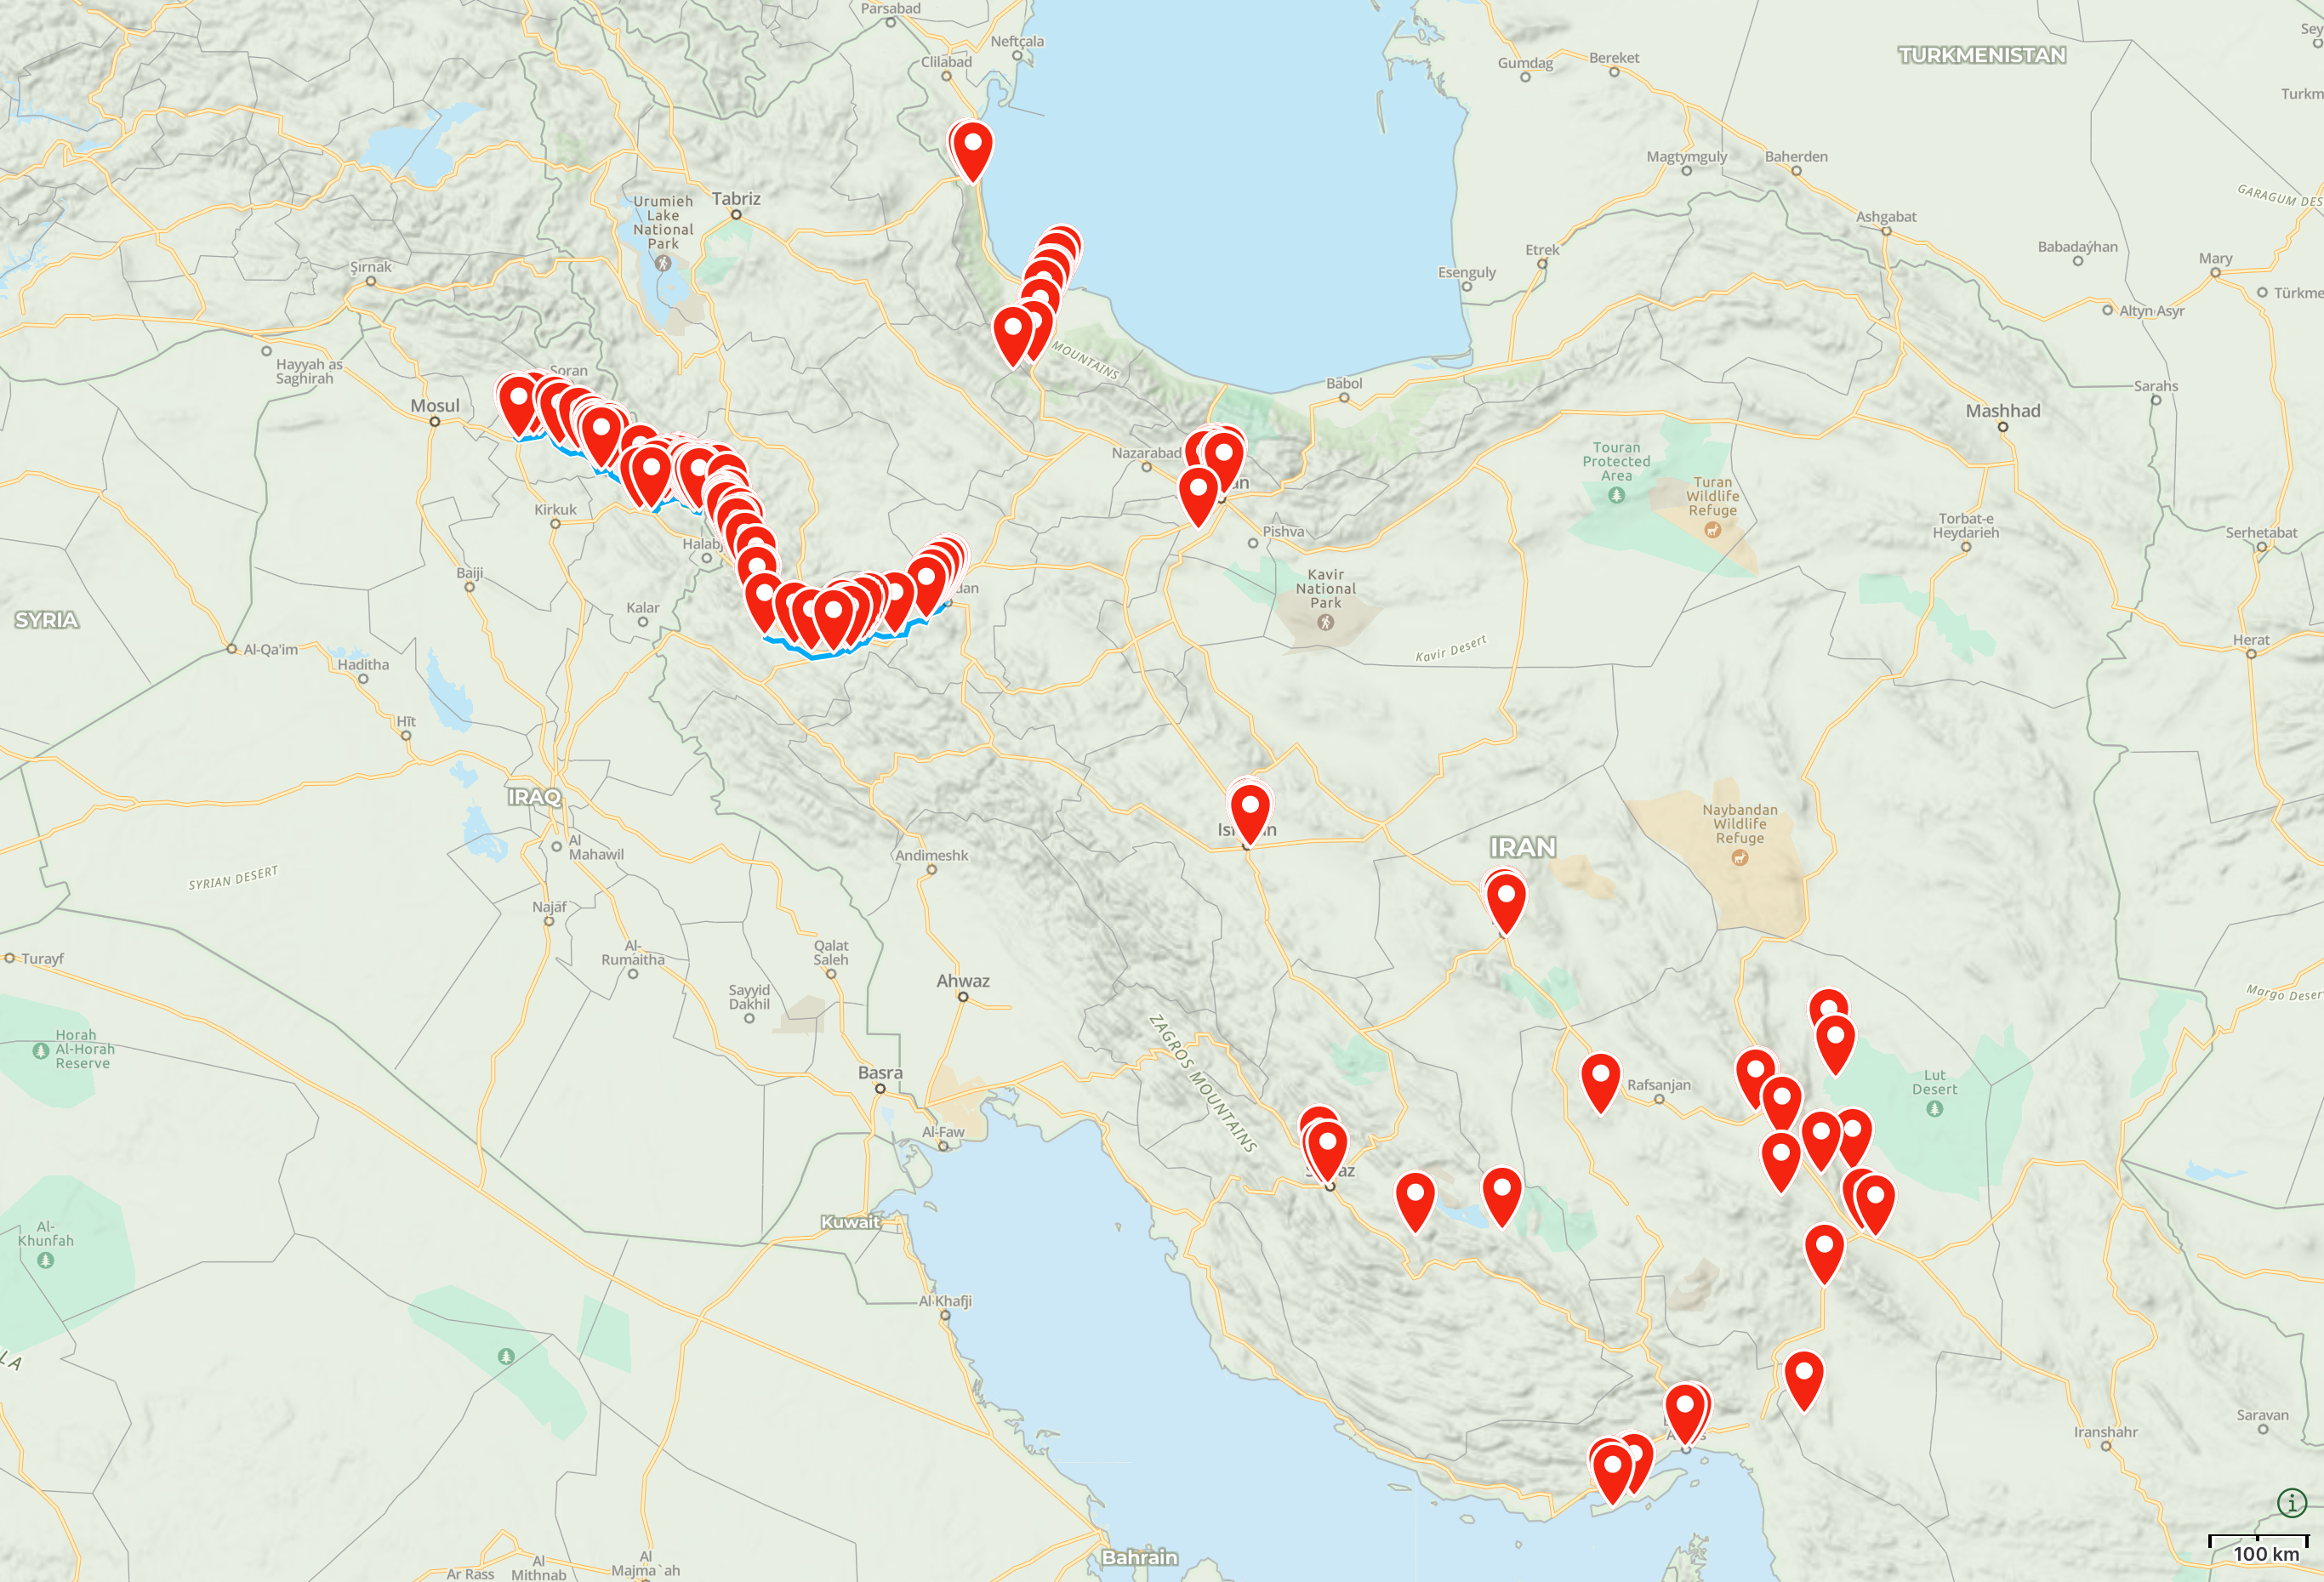 Map of Iran and Iraq with the approximate locations of the pictures on this page highlighted.